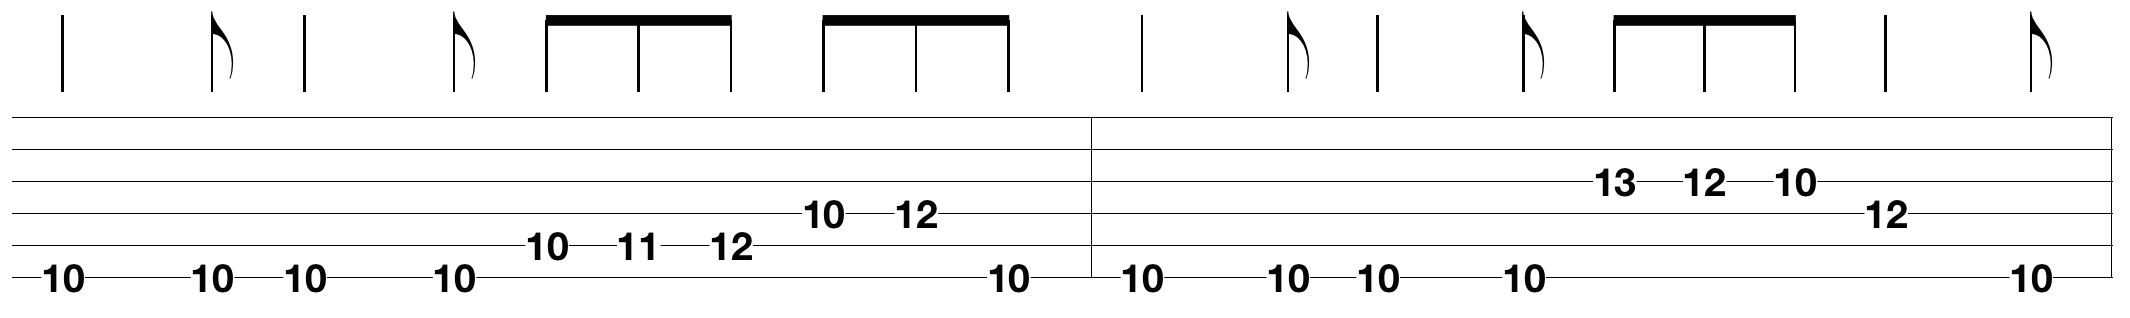 blues-guitar-scales-tabs_2.png